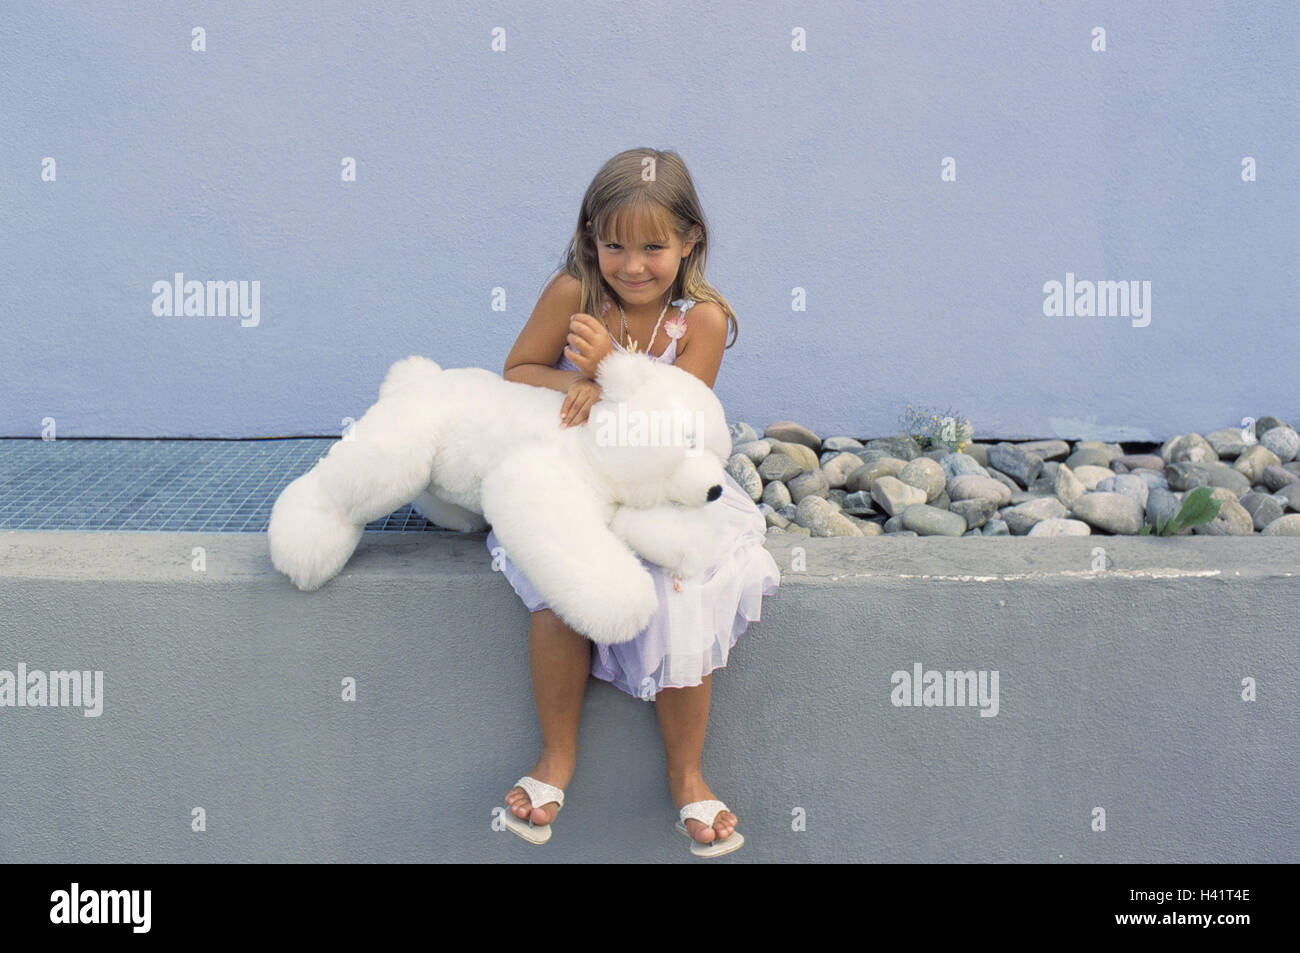 Girls, happy, sit, defensive wall, soft toy, summer, leisure time, house, detail, outside wall, child, long-haired, blond, summer dress, smile, happy, course, teddy bear, nonsense animal, toys, substance bear, 'polar bear', childhood, only, outside, whole Stock Photo